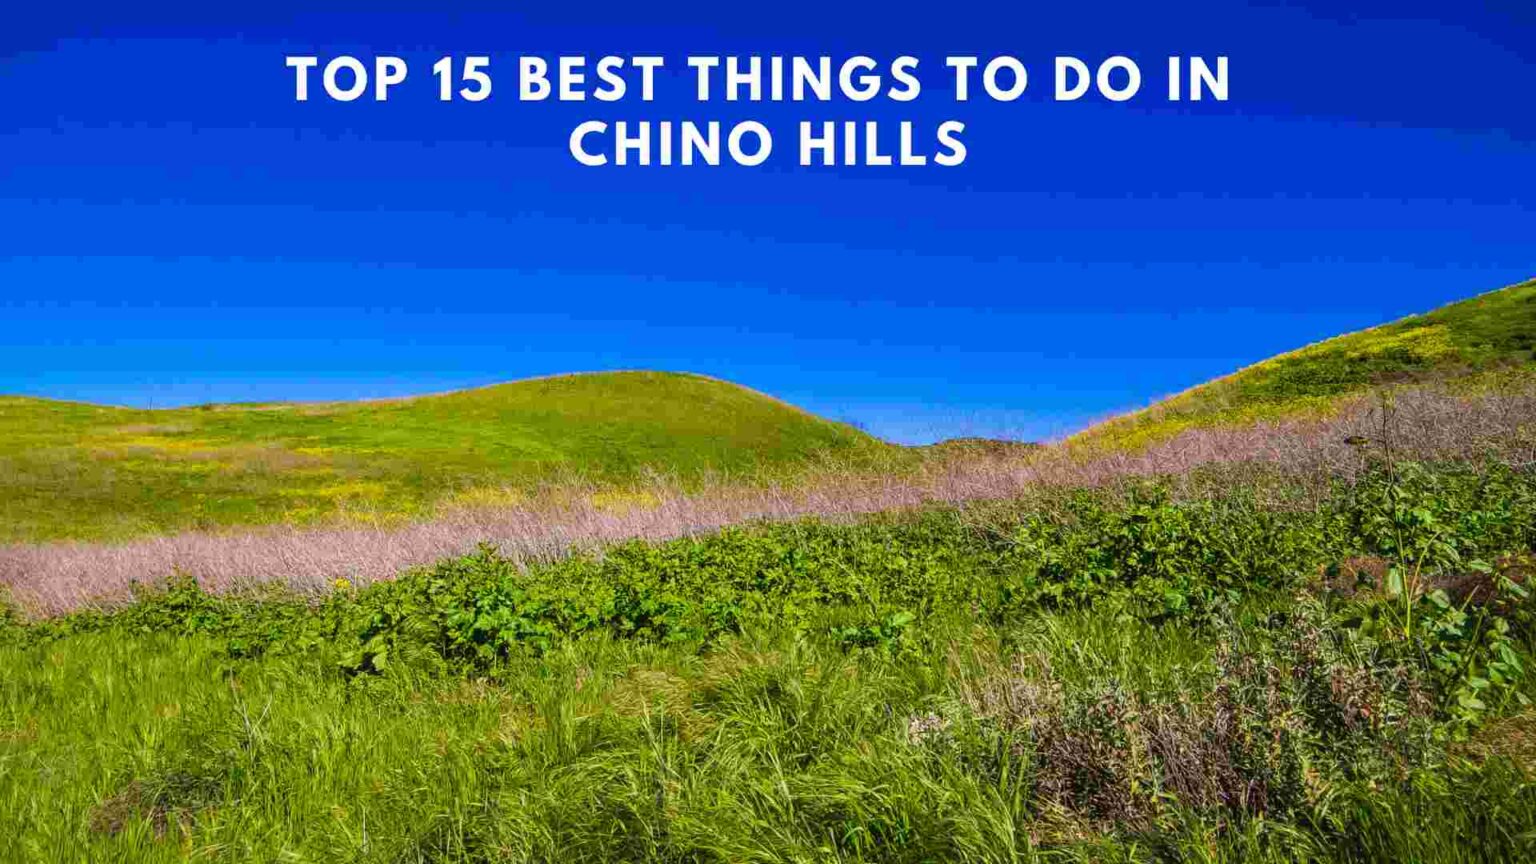 Top 15 Best Things To Do In Chino Hills